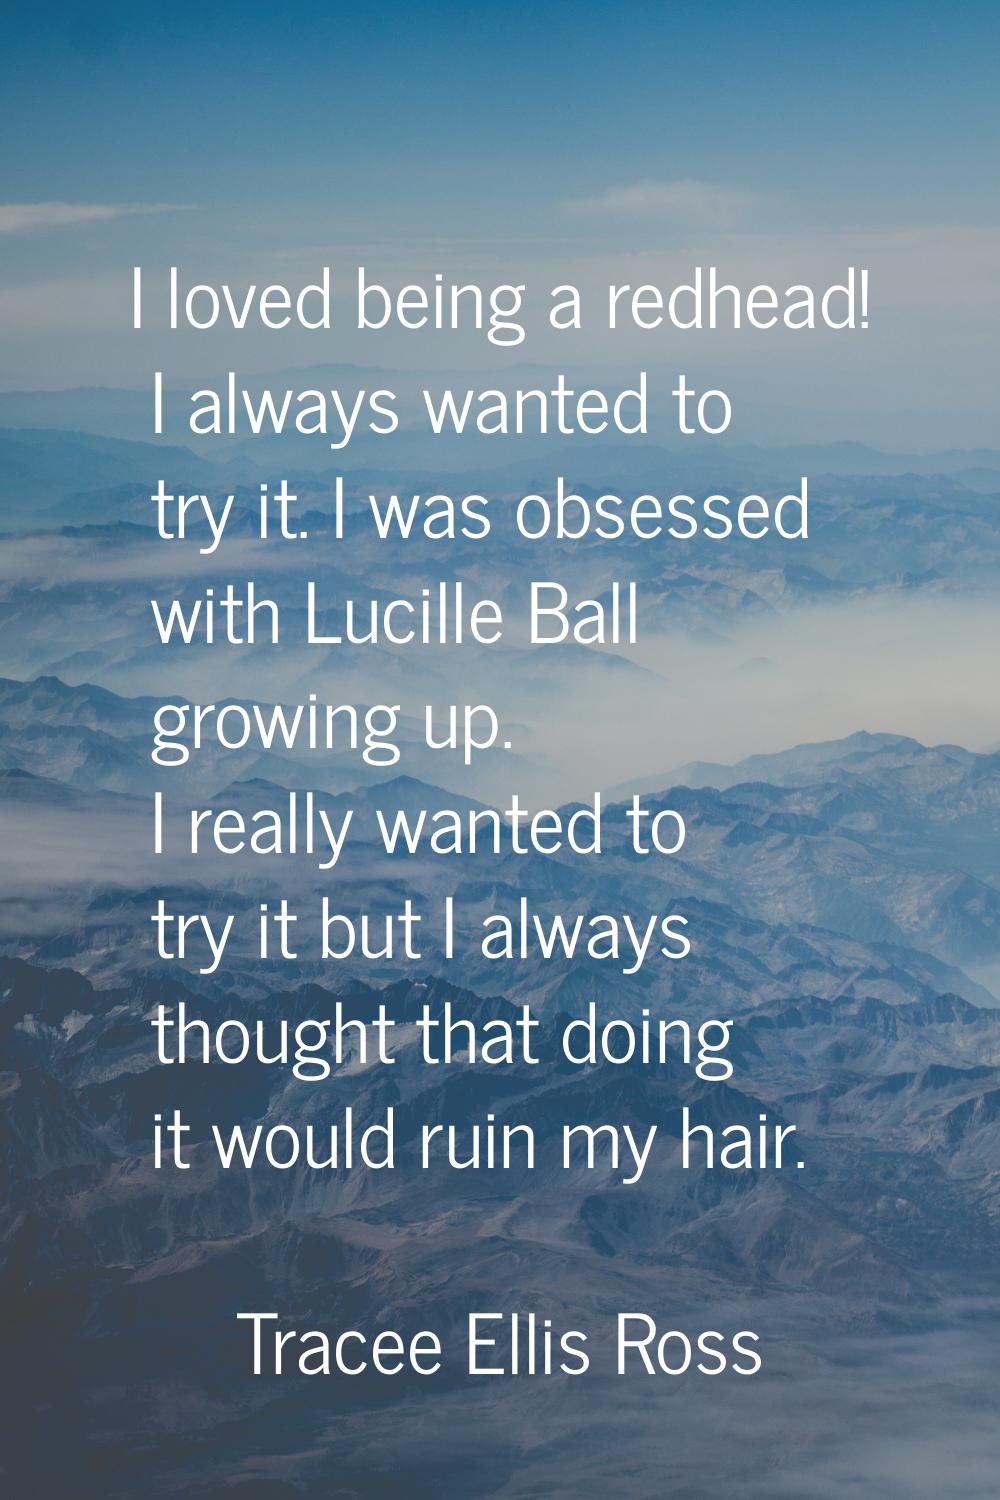 I loved being a redhead! I always wanted to try it. I was obsessed with Lucille Ball growing up. I 